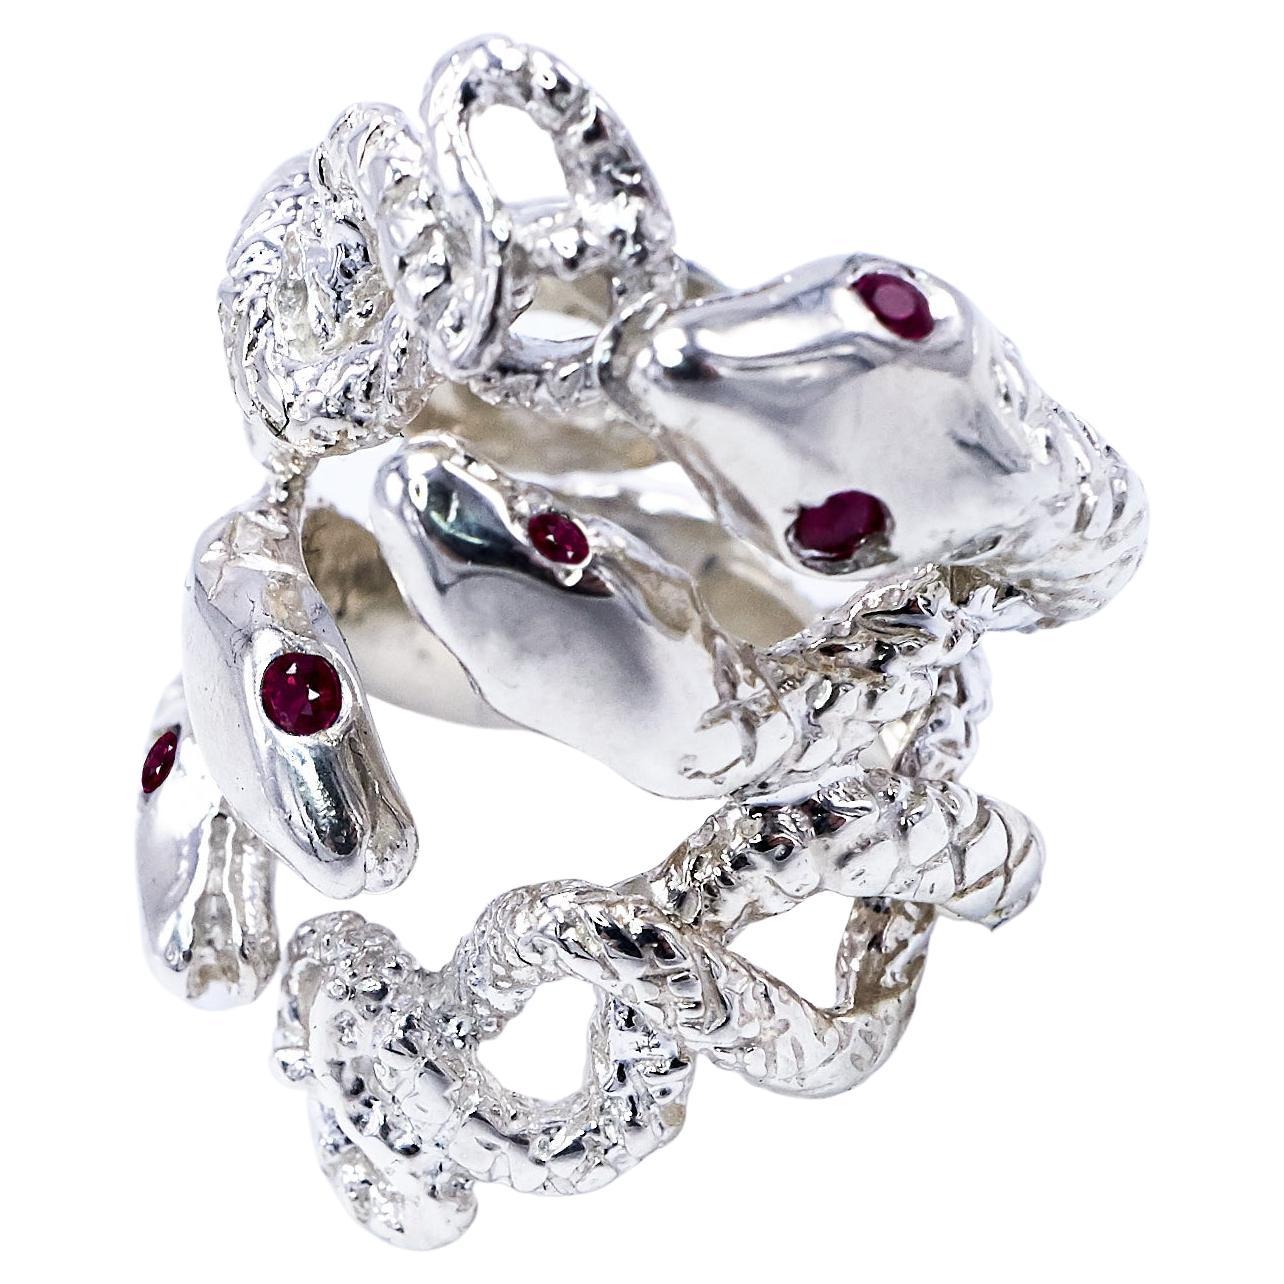 Ruby Snake Ring Silver Statement Cocktail Ring Adjustable Onesie J Dauphin For Sale